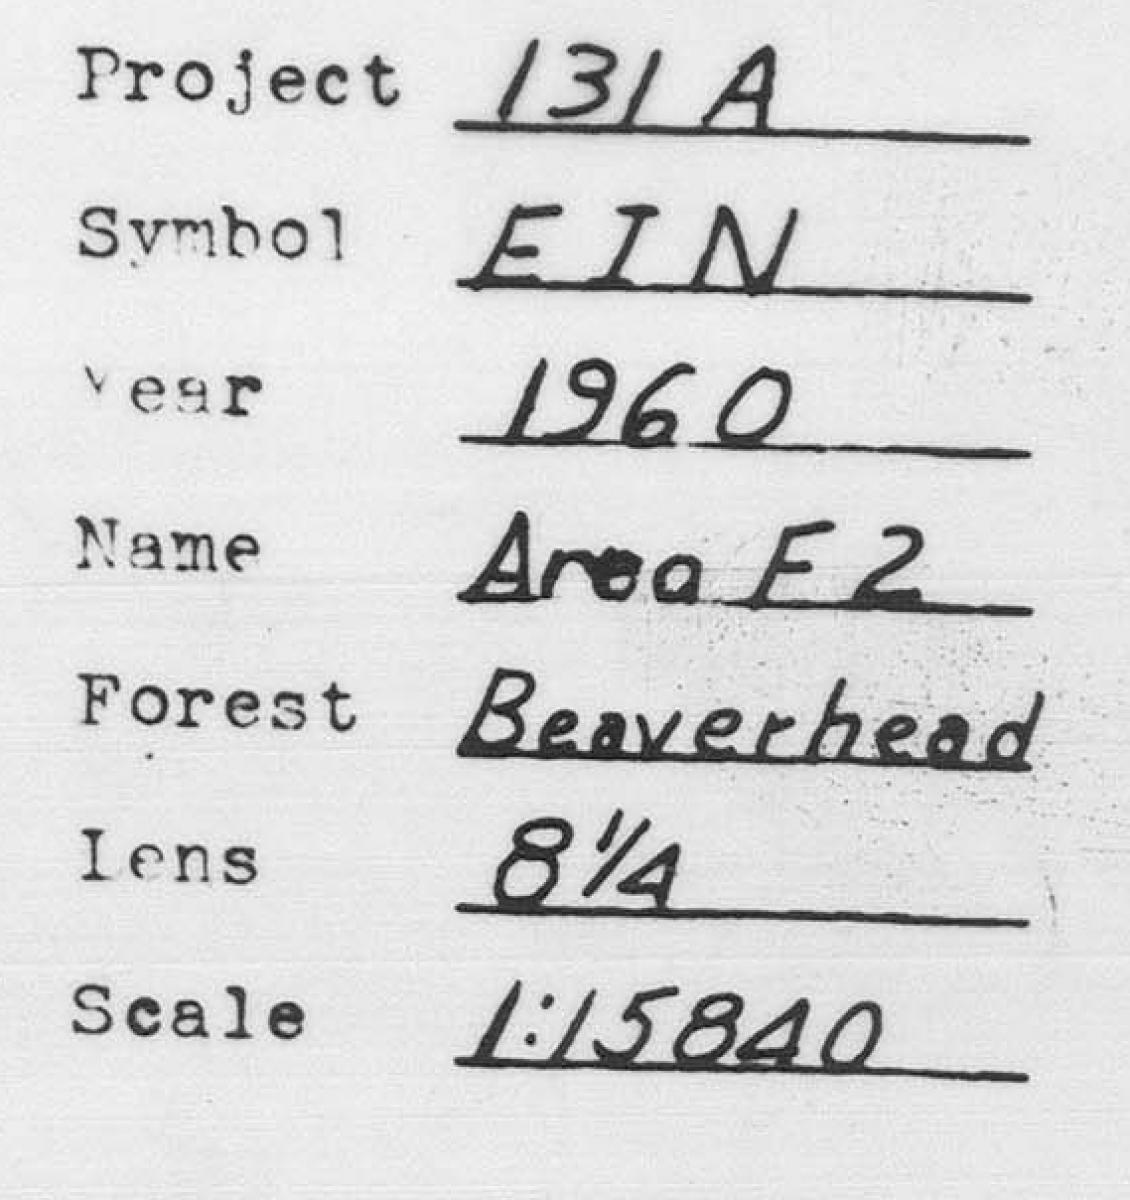 RG 95, Indexes to Aerial Photography, Beaverhead National Forest, 1960, EIN, symbol information close up